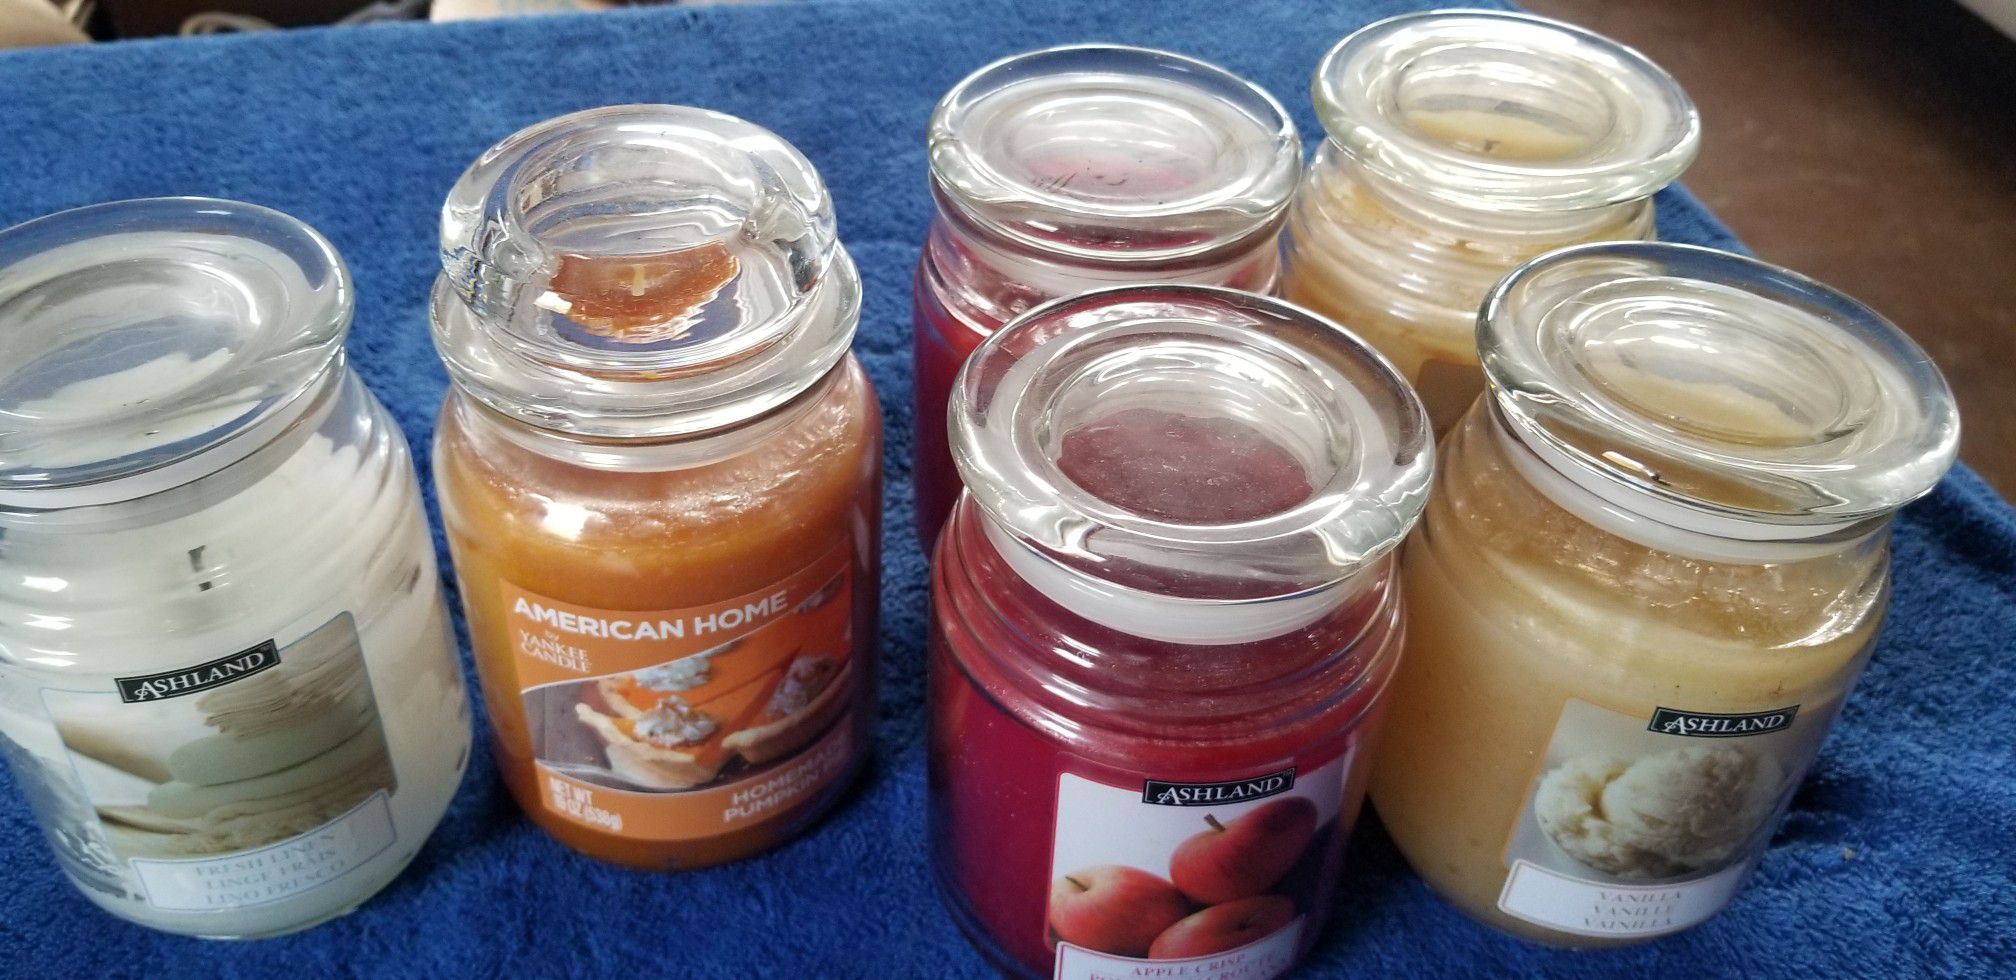 4 large scented candles (17 oz each)